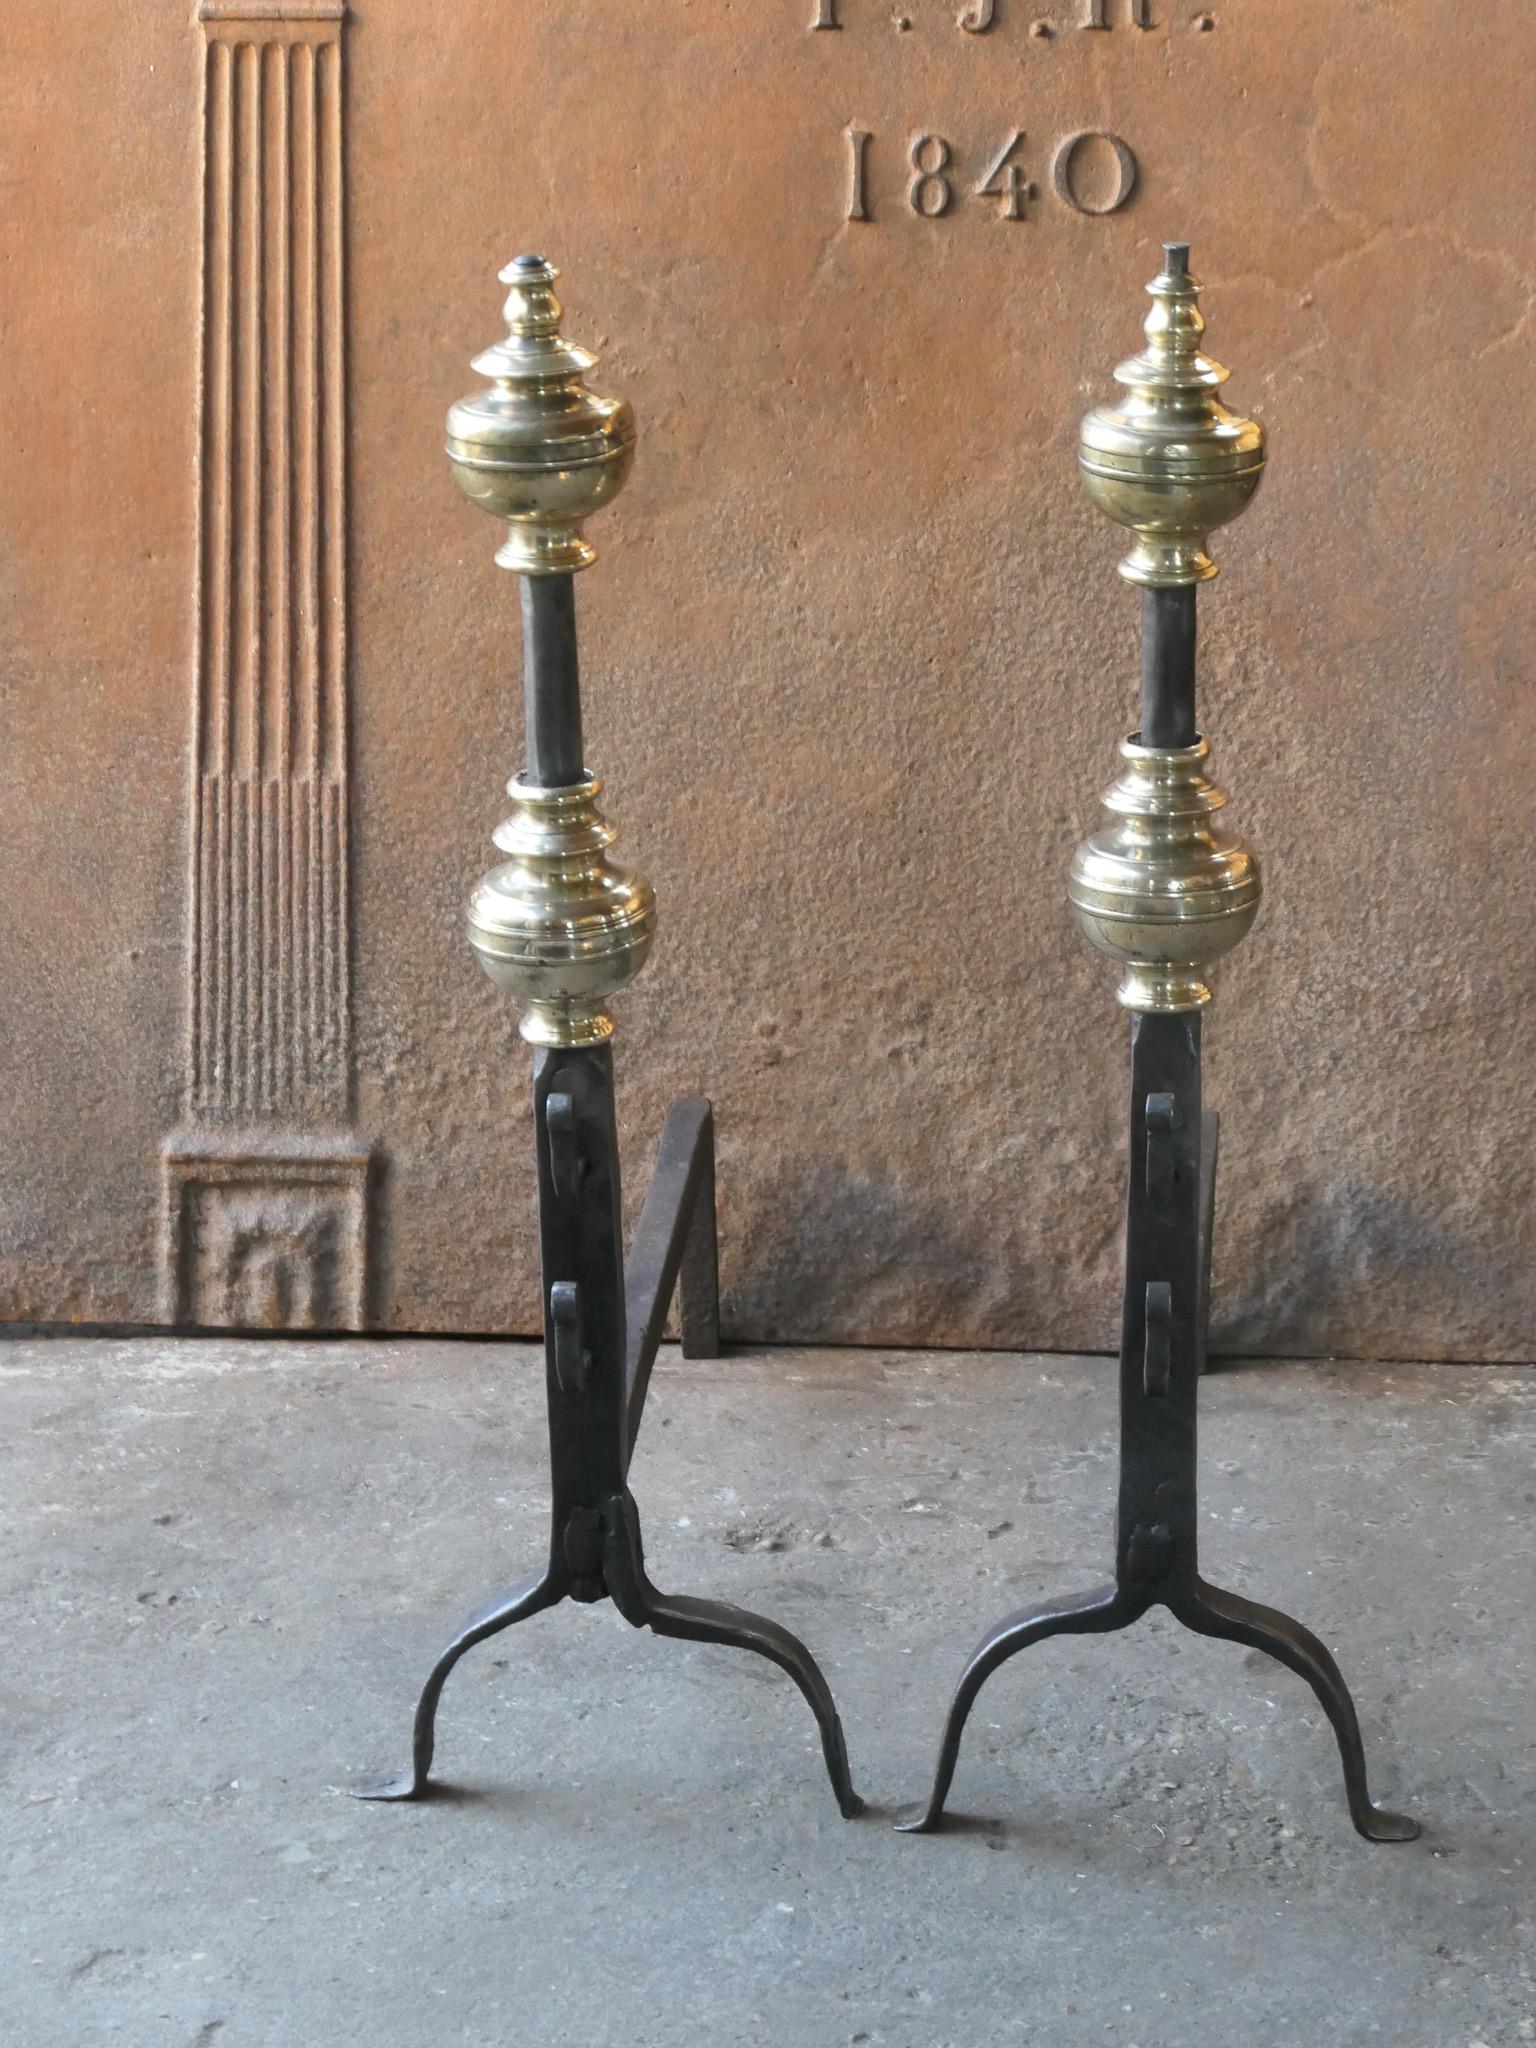 Beautiful 17th century French Louis XIV period andirons. They are hand forged and made of wrought iron and polished brass. The top of the andiron at the right in the pictures has been damaged slightly. The andirons are fully functional. 






